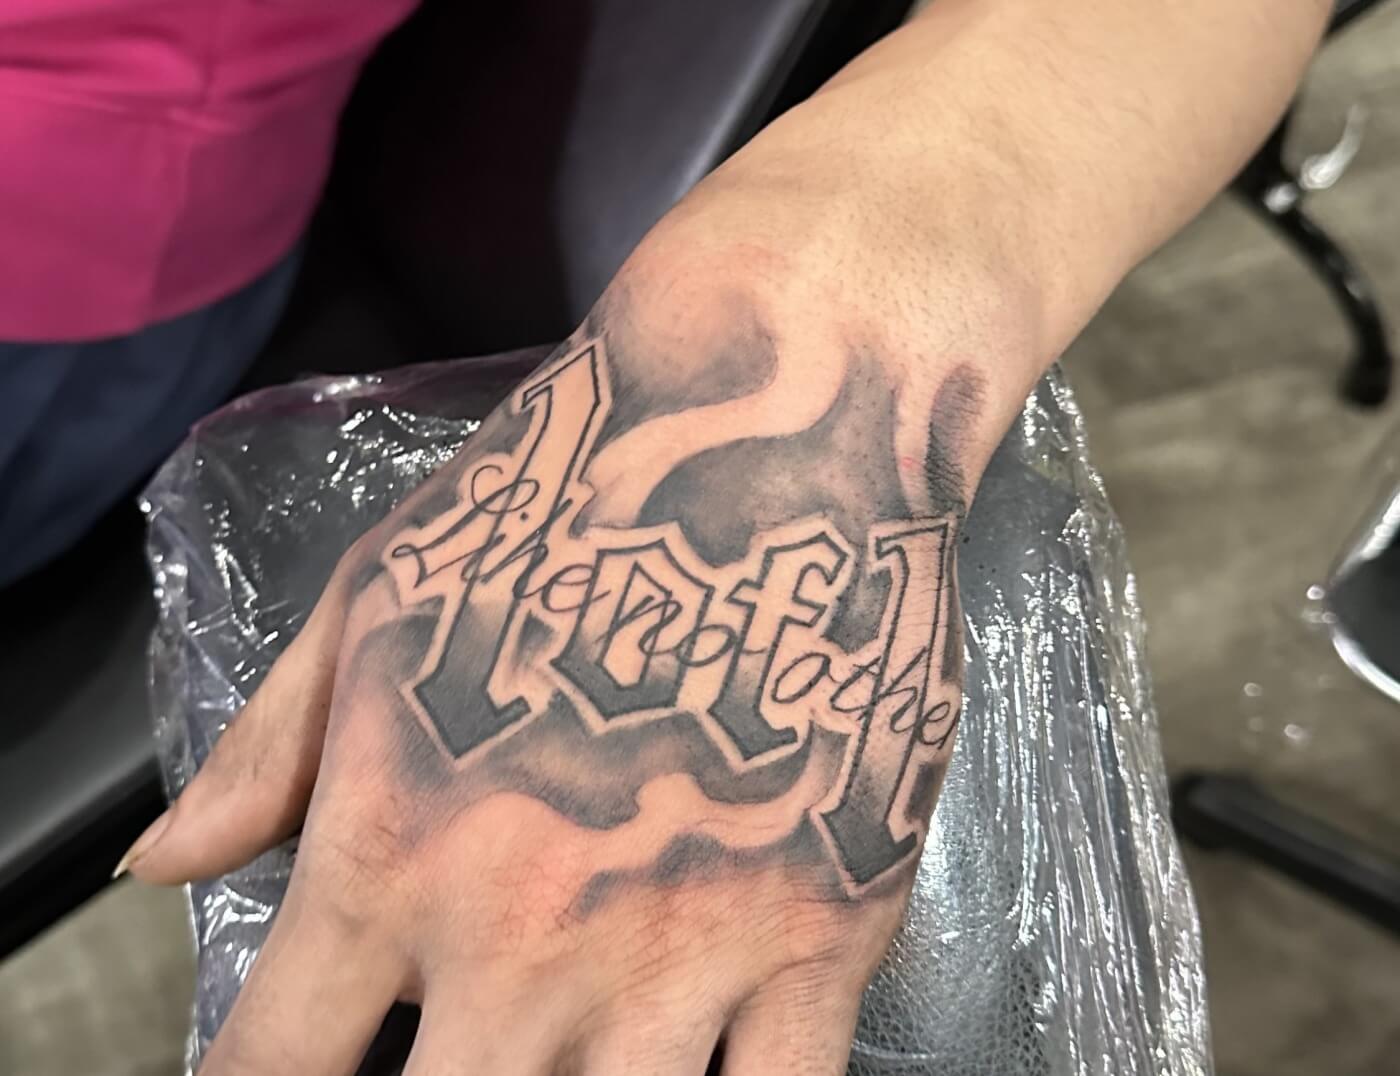 "Laughing Out Freaking Loud" (Like No Other) Tattoo By The Artist Choze At Iron Palm Tattoos In Atlanta GA. Call 404-973-7828 or stop by for a free consultation. Walk-Ins are welcome.